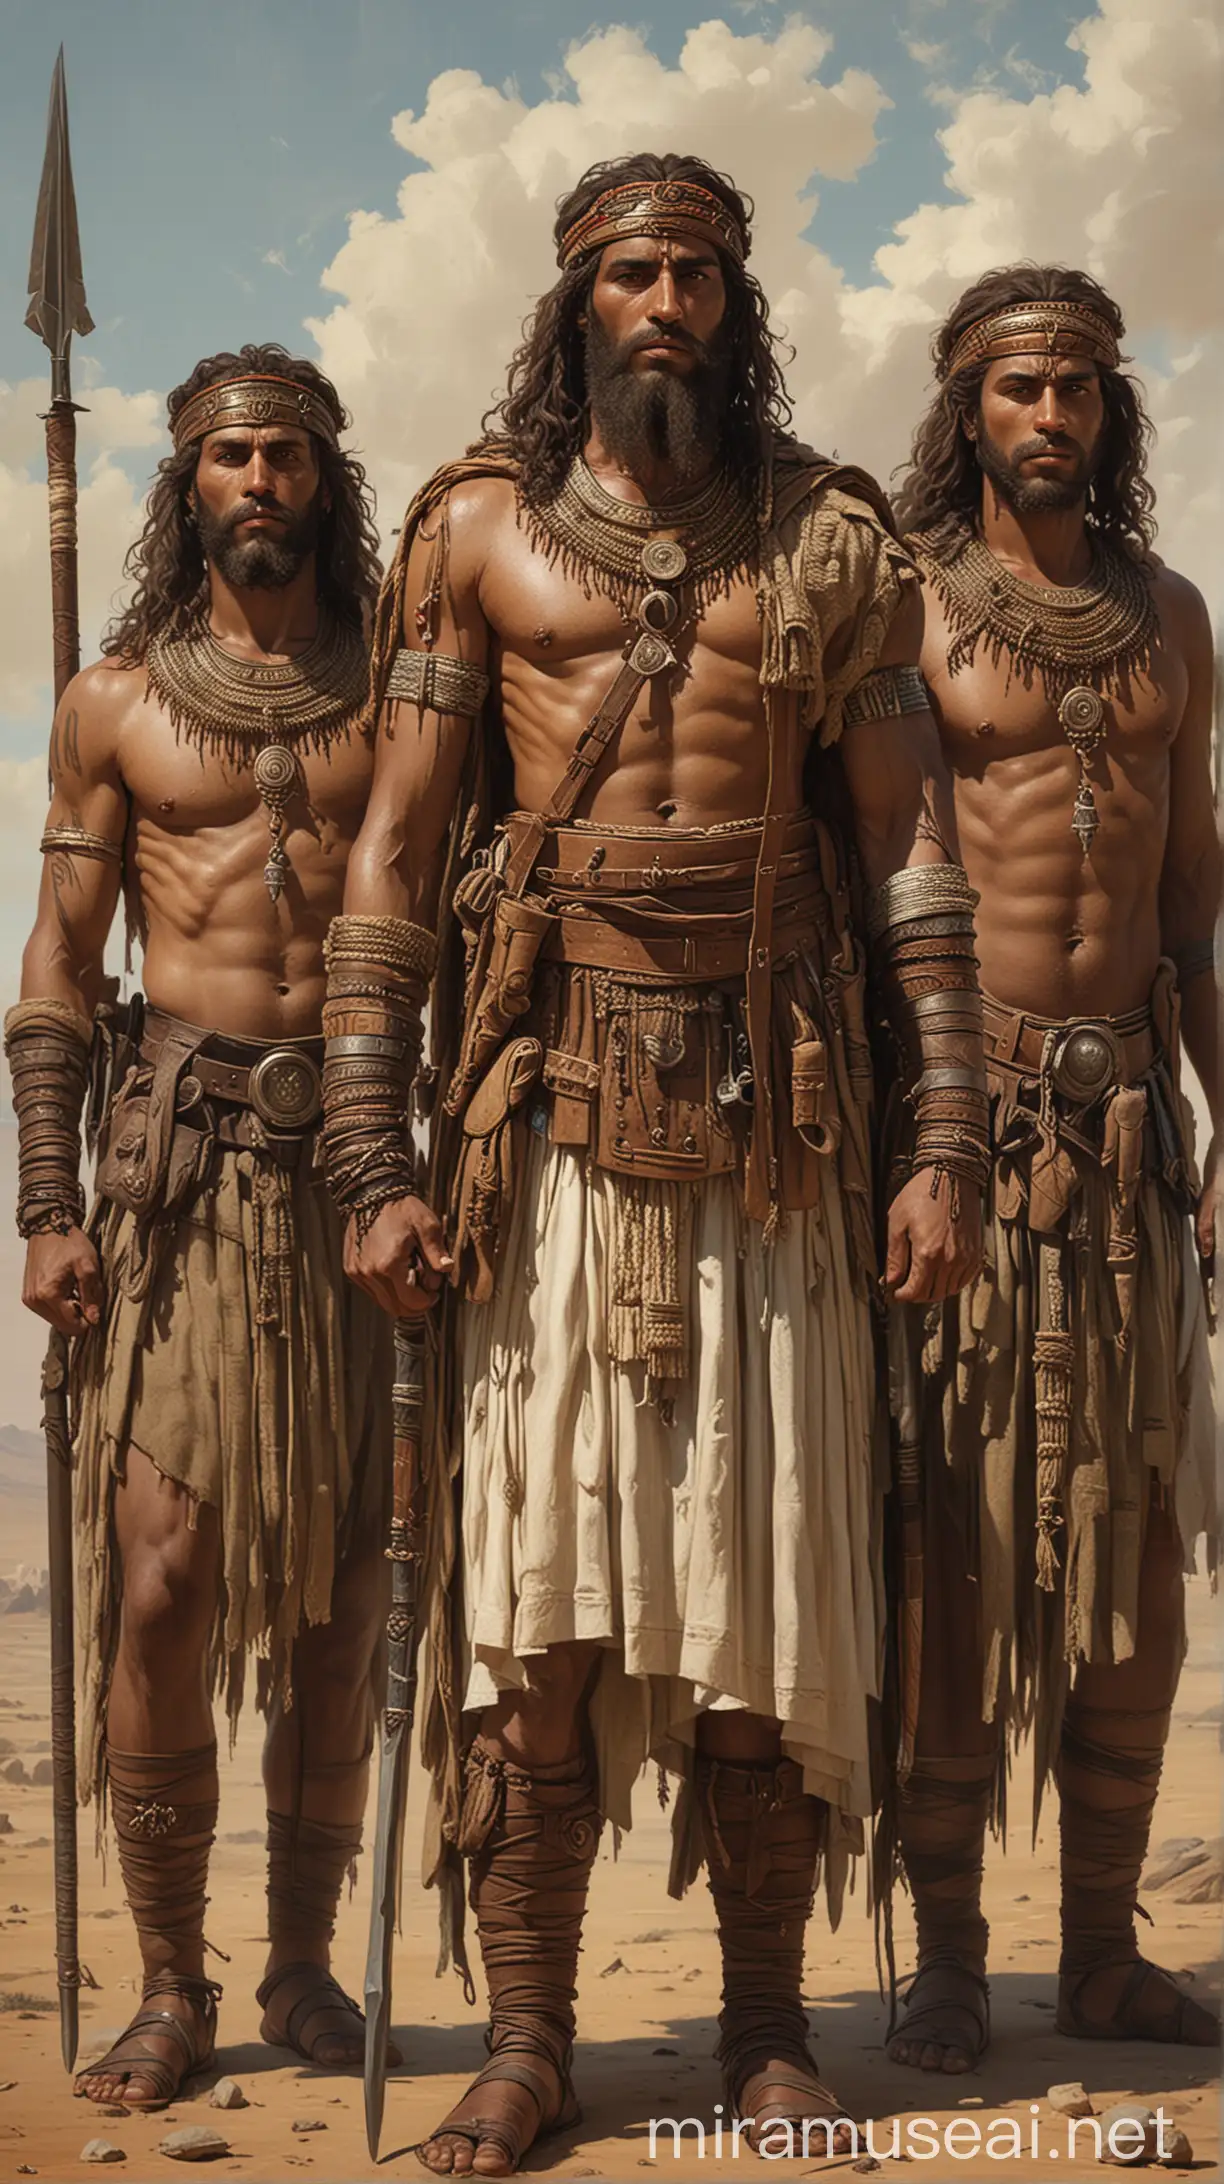 Ara a jewish warrior standing proudly with his brothers, Jephunneh and Pispah, each displaying distinct warrior attributes. The bond and respect among them are evident."